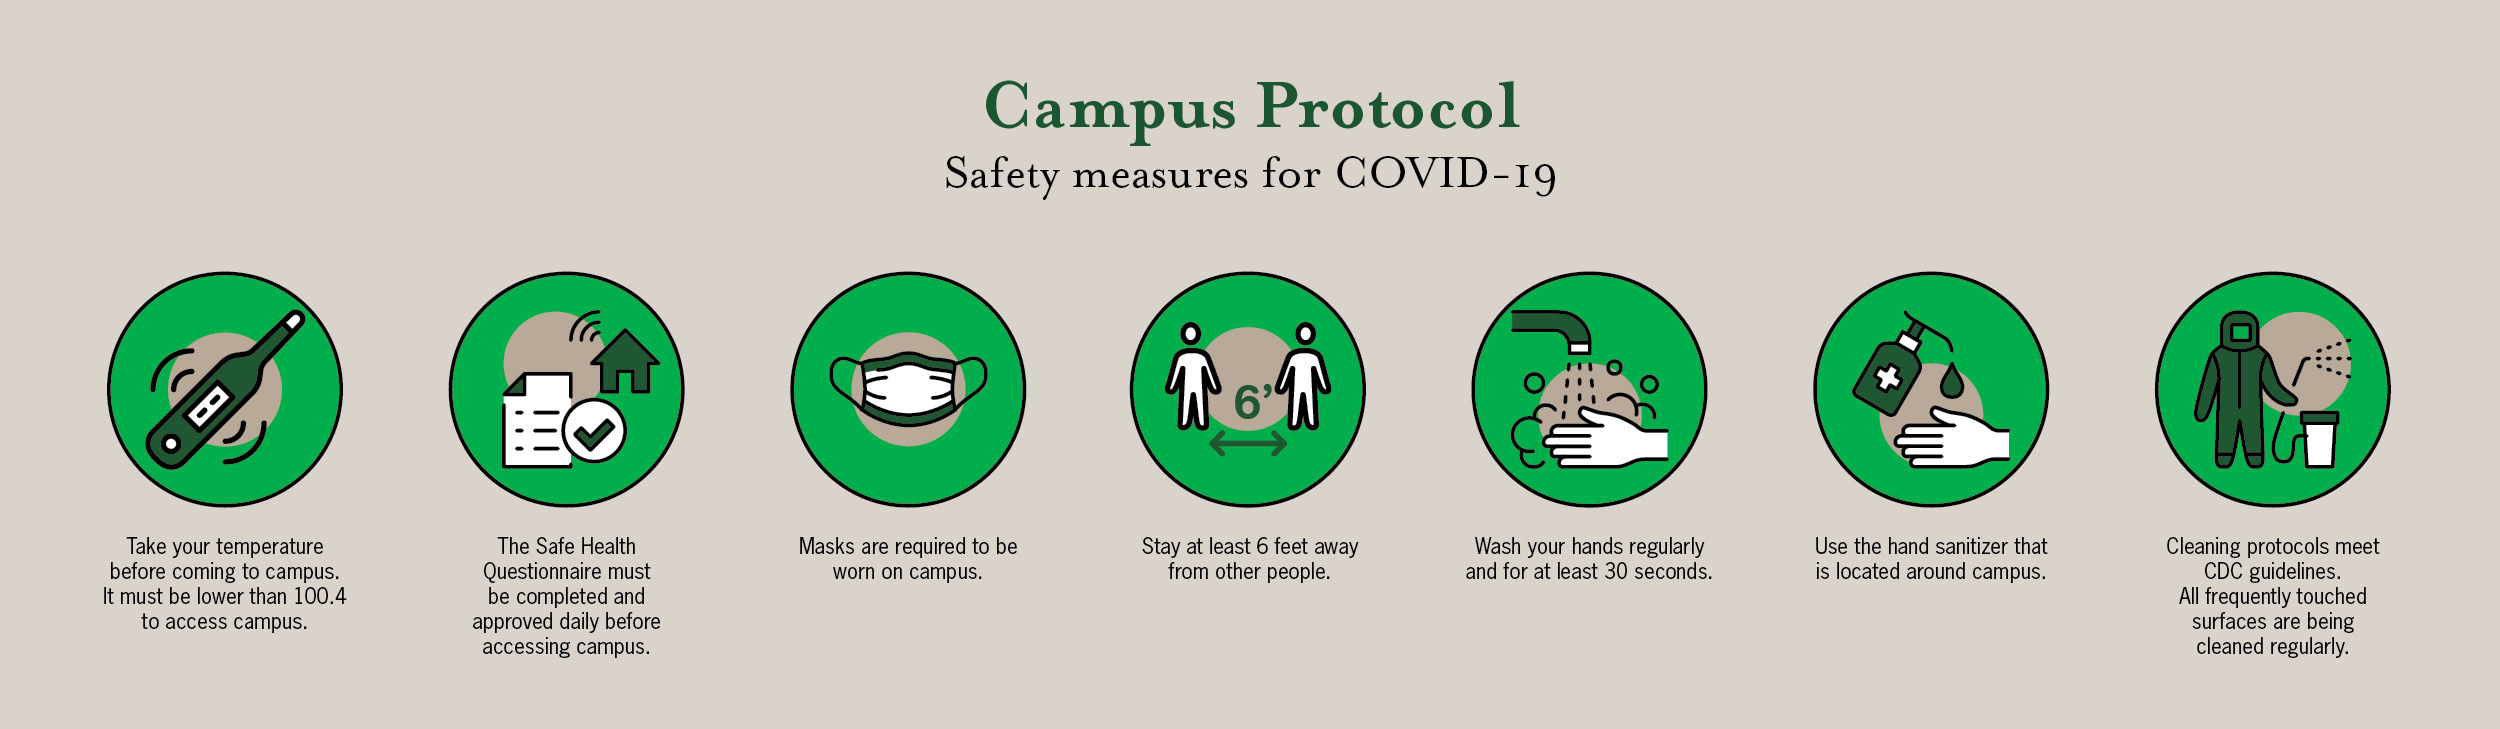 Campus Protocol for safety measures for Covid-19